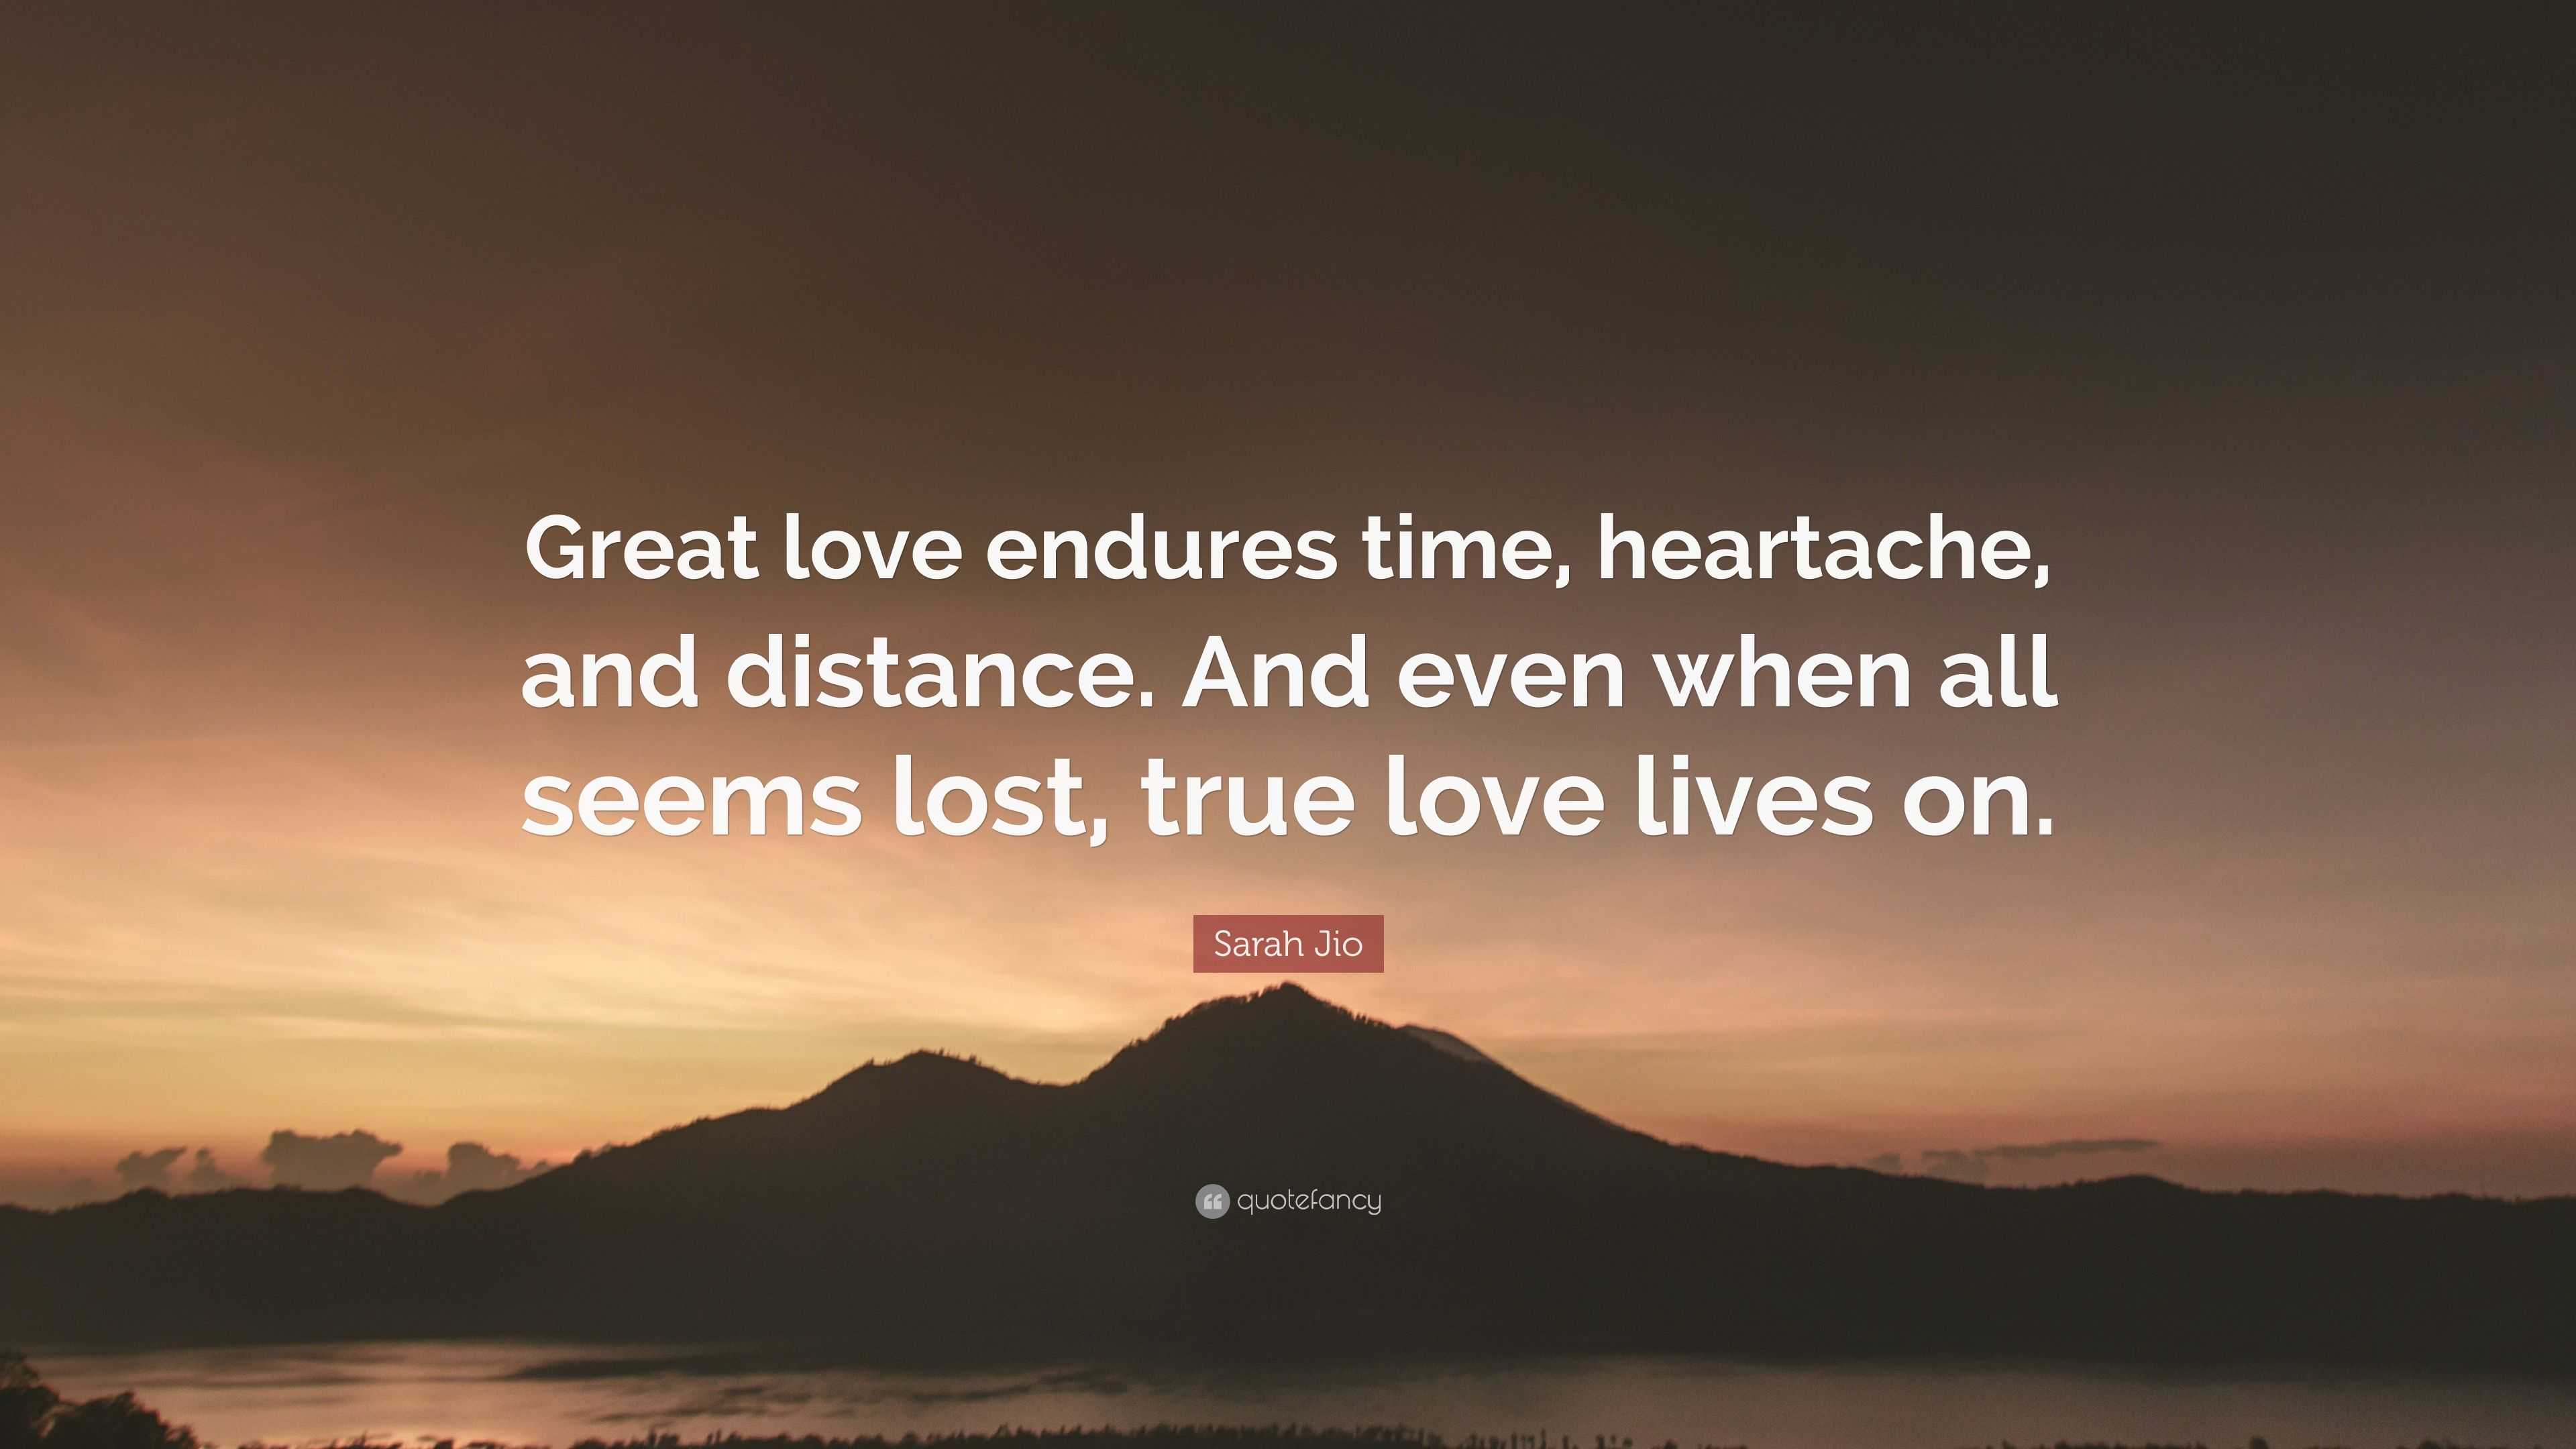 Sarah Jio Quote “Great love endures time heartache and distance And